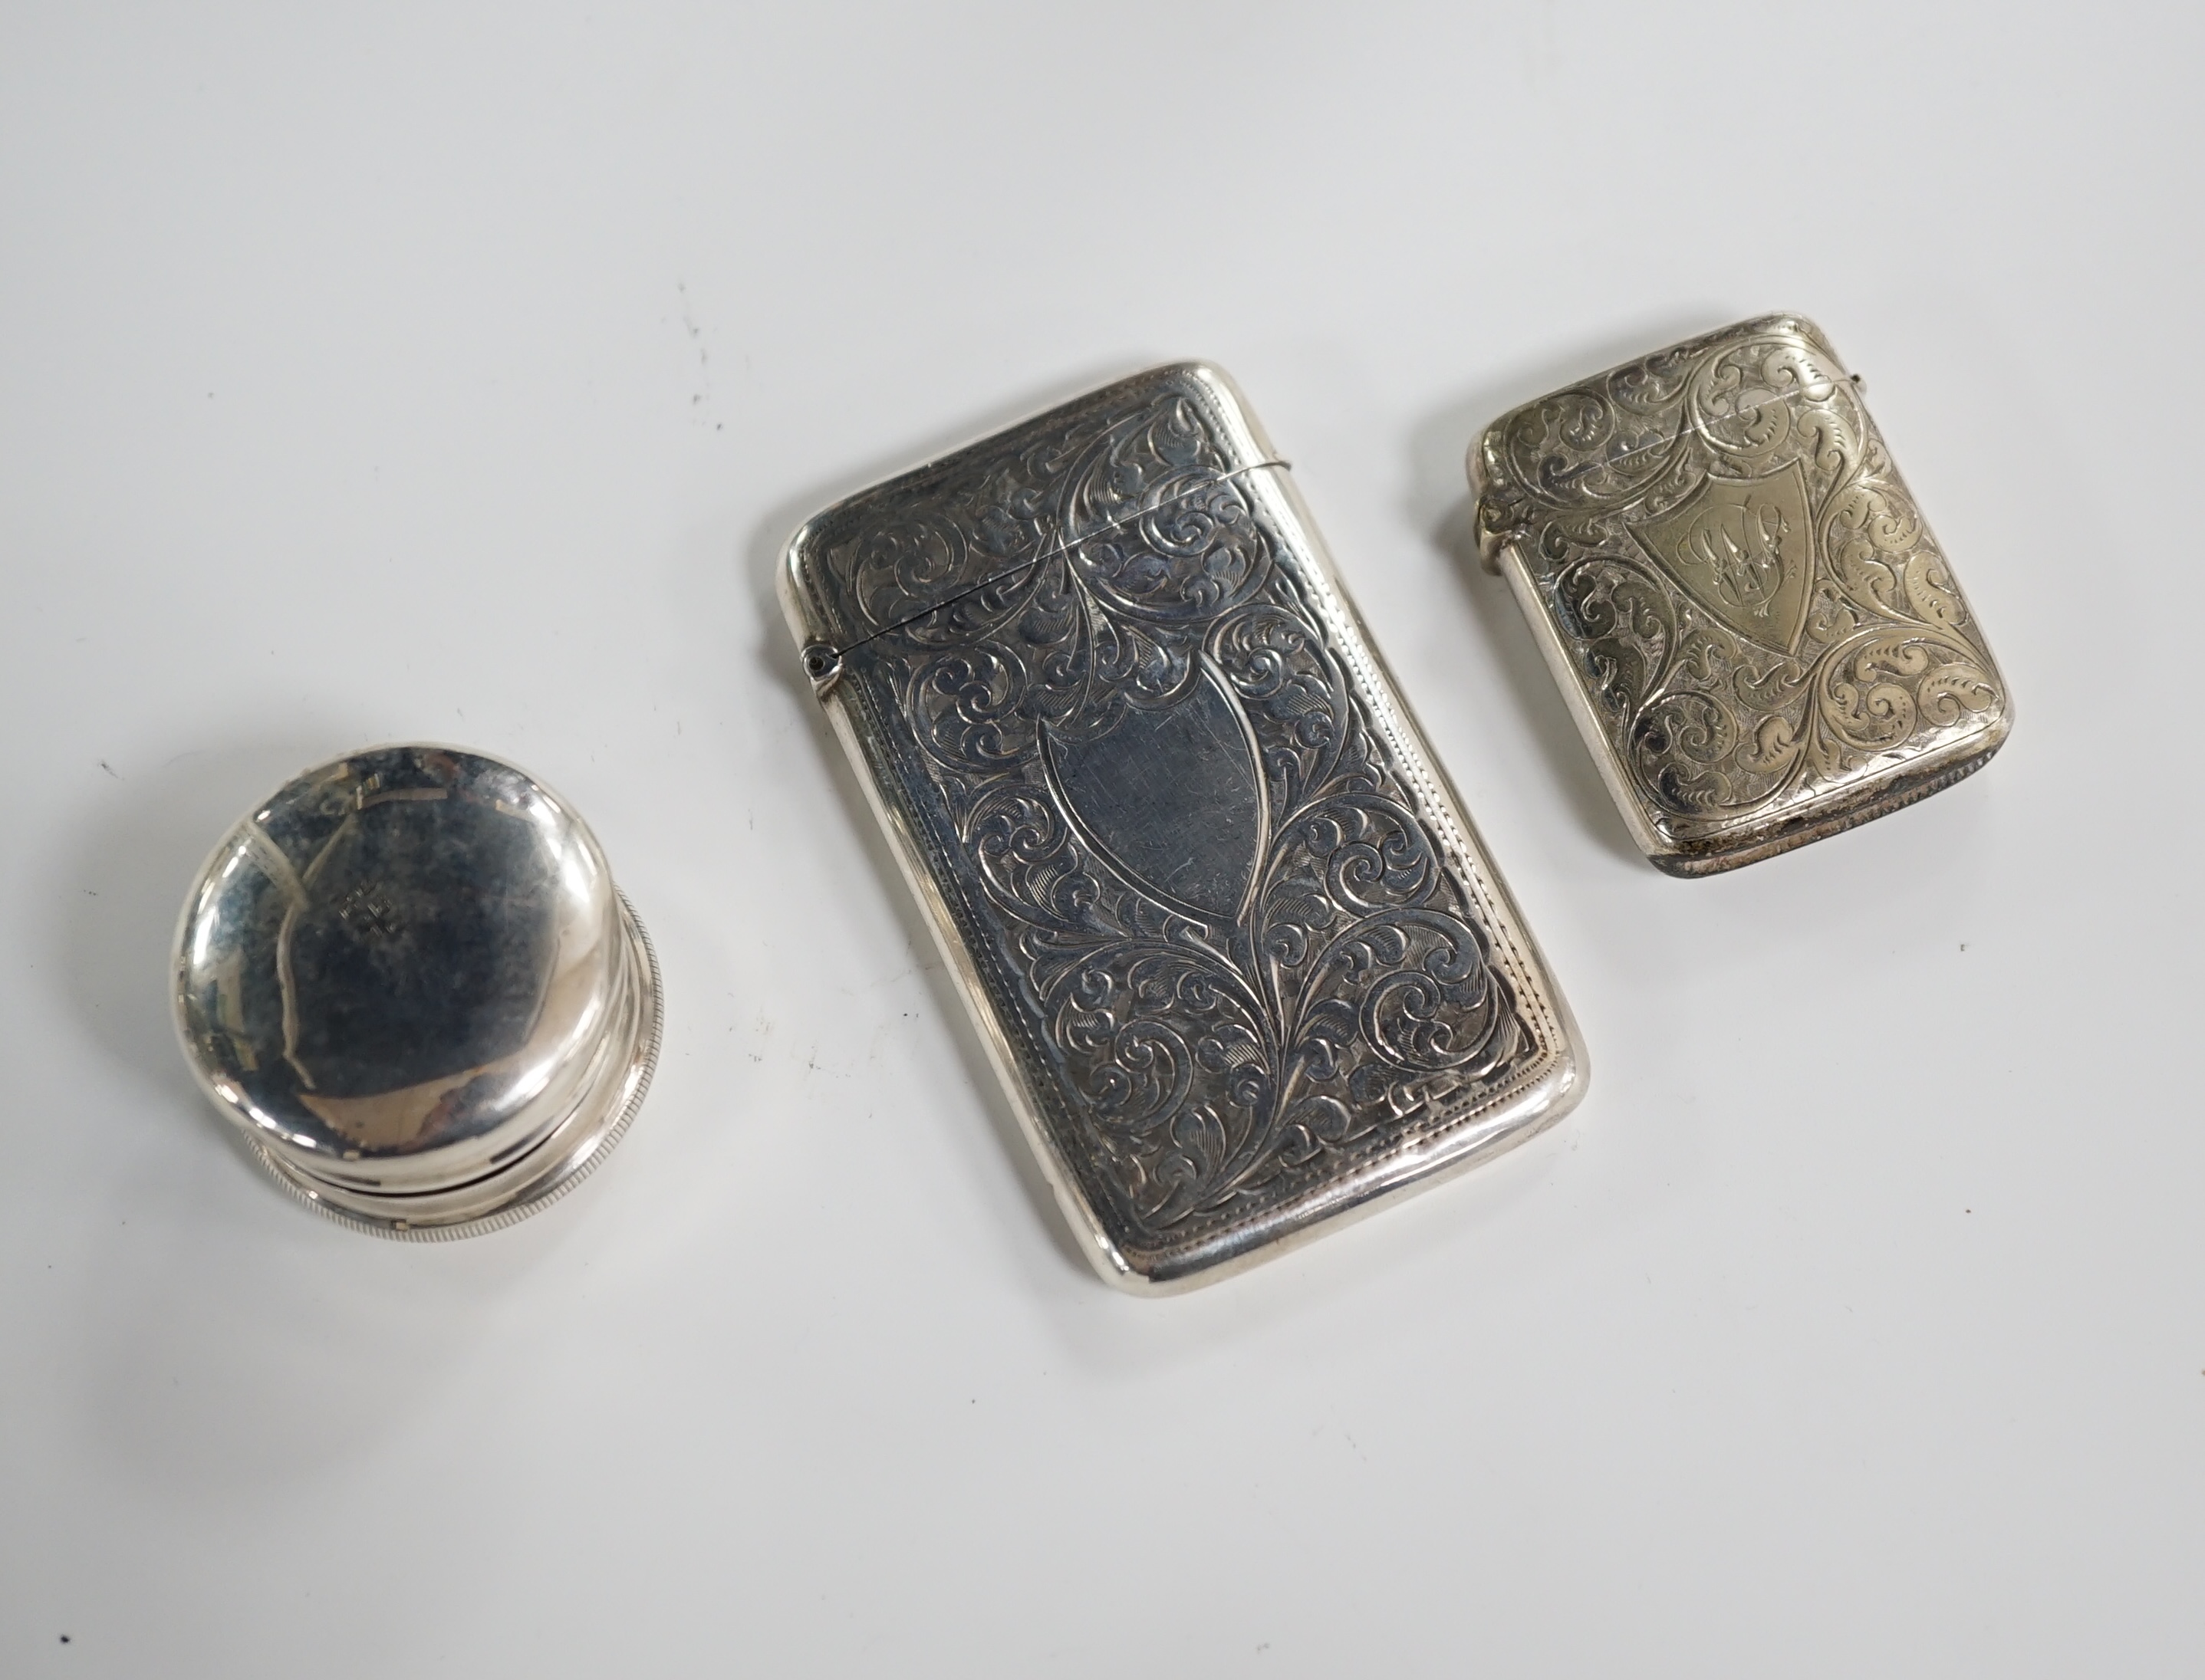 An Edwardian engraved silver card case, Birmingham, 1906, 84mm, together with a silver plated vesta case and a silver pill box. Condition - card and vesta cases, fair, pill box mis-shapen